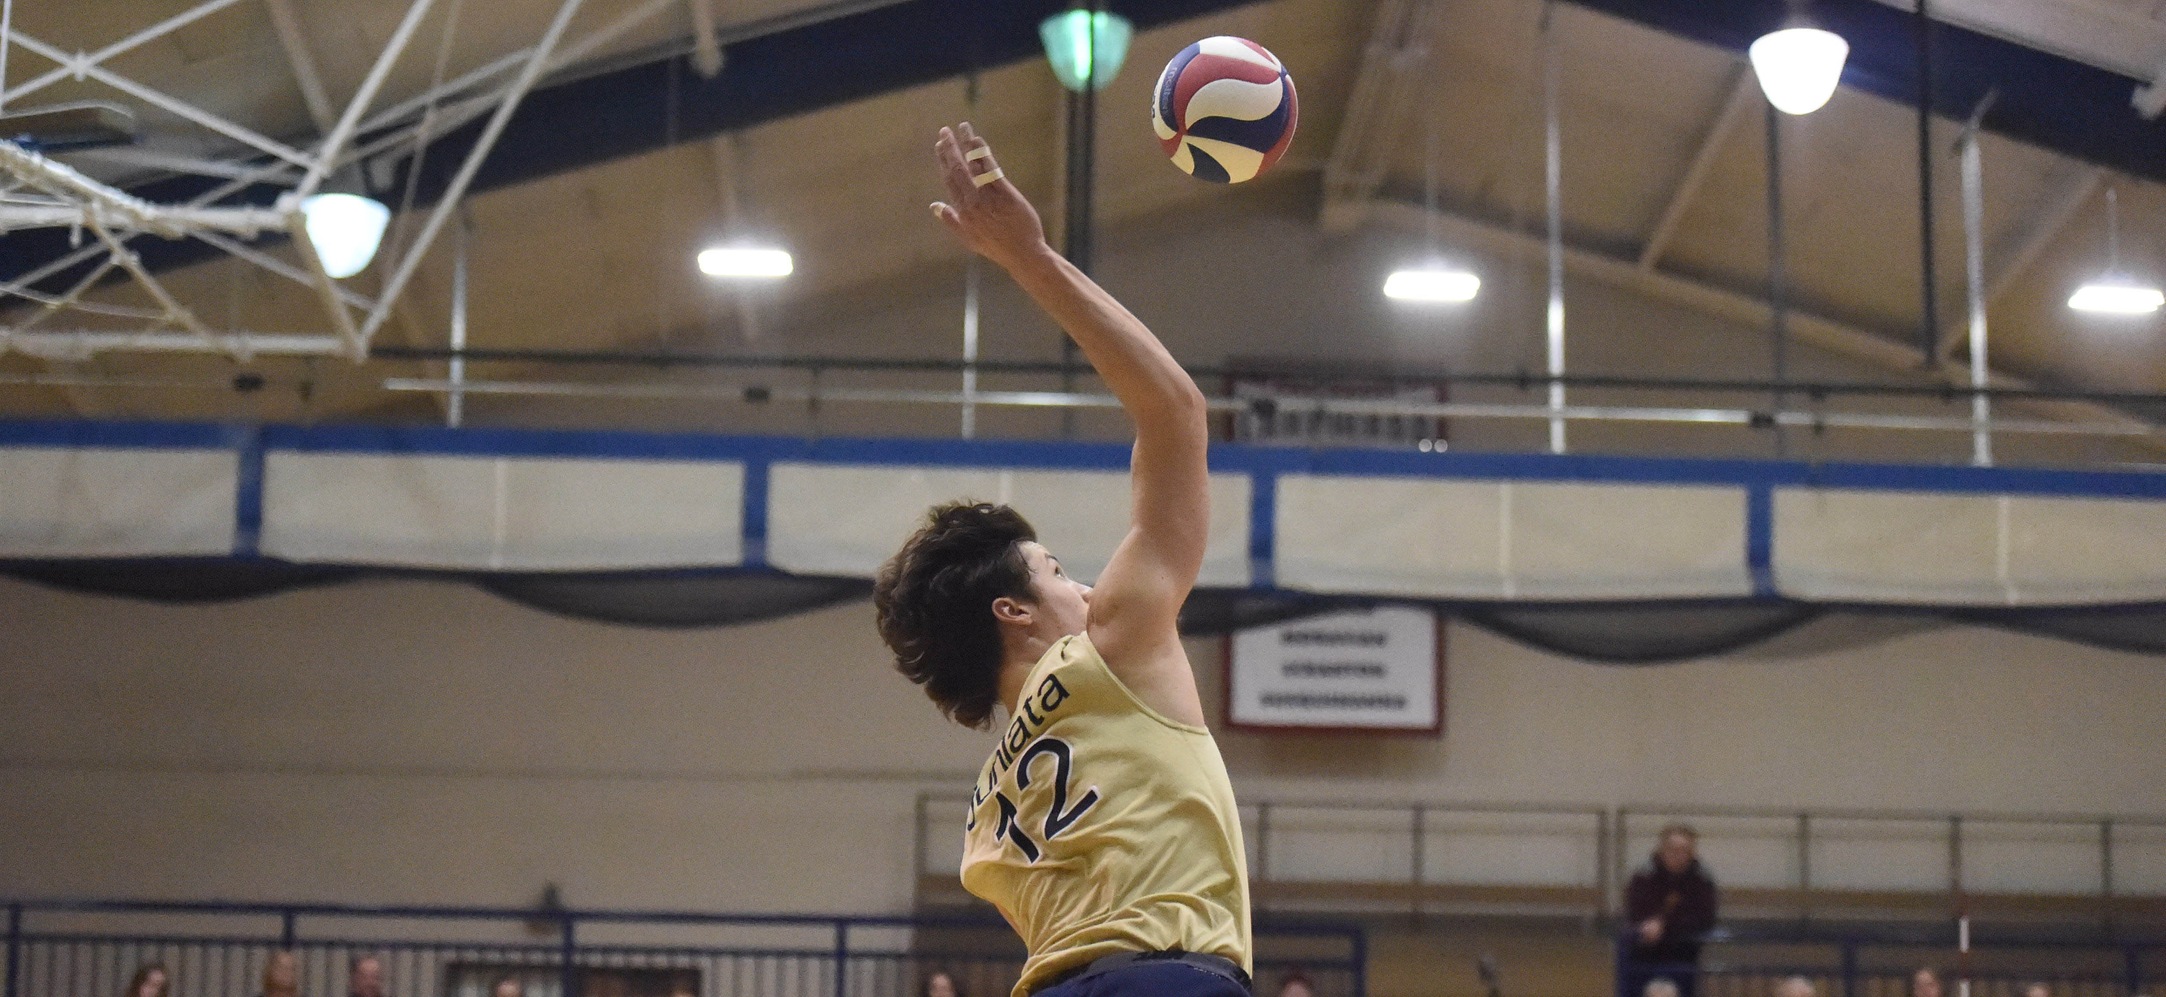 Quinn Peterson racked up 44 kills and 21 digs to lead the Eagles to a pair of victories on Friday.